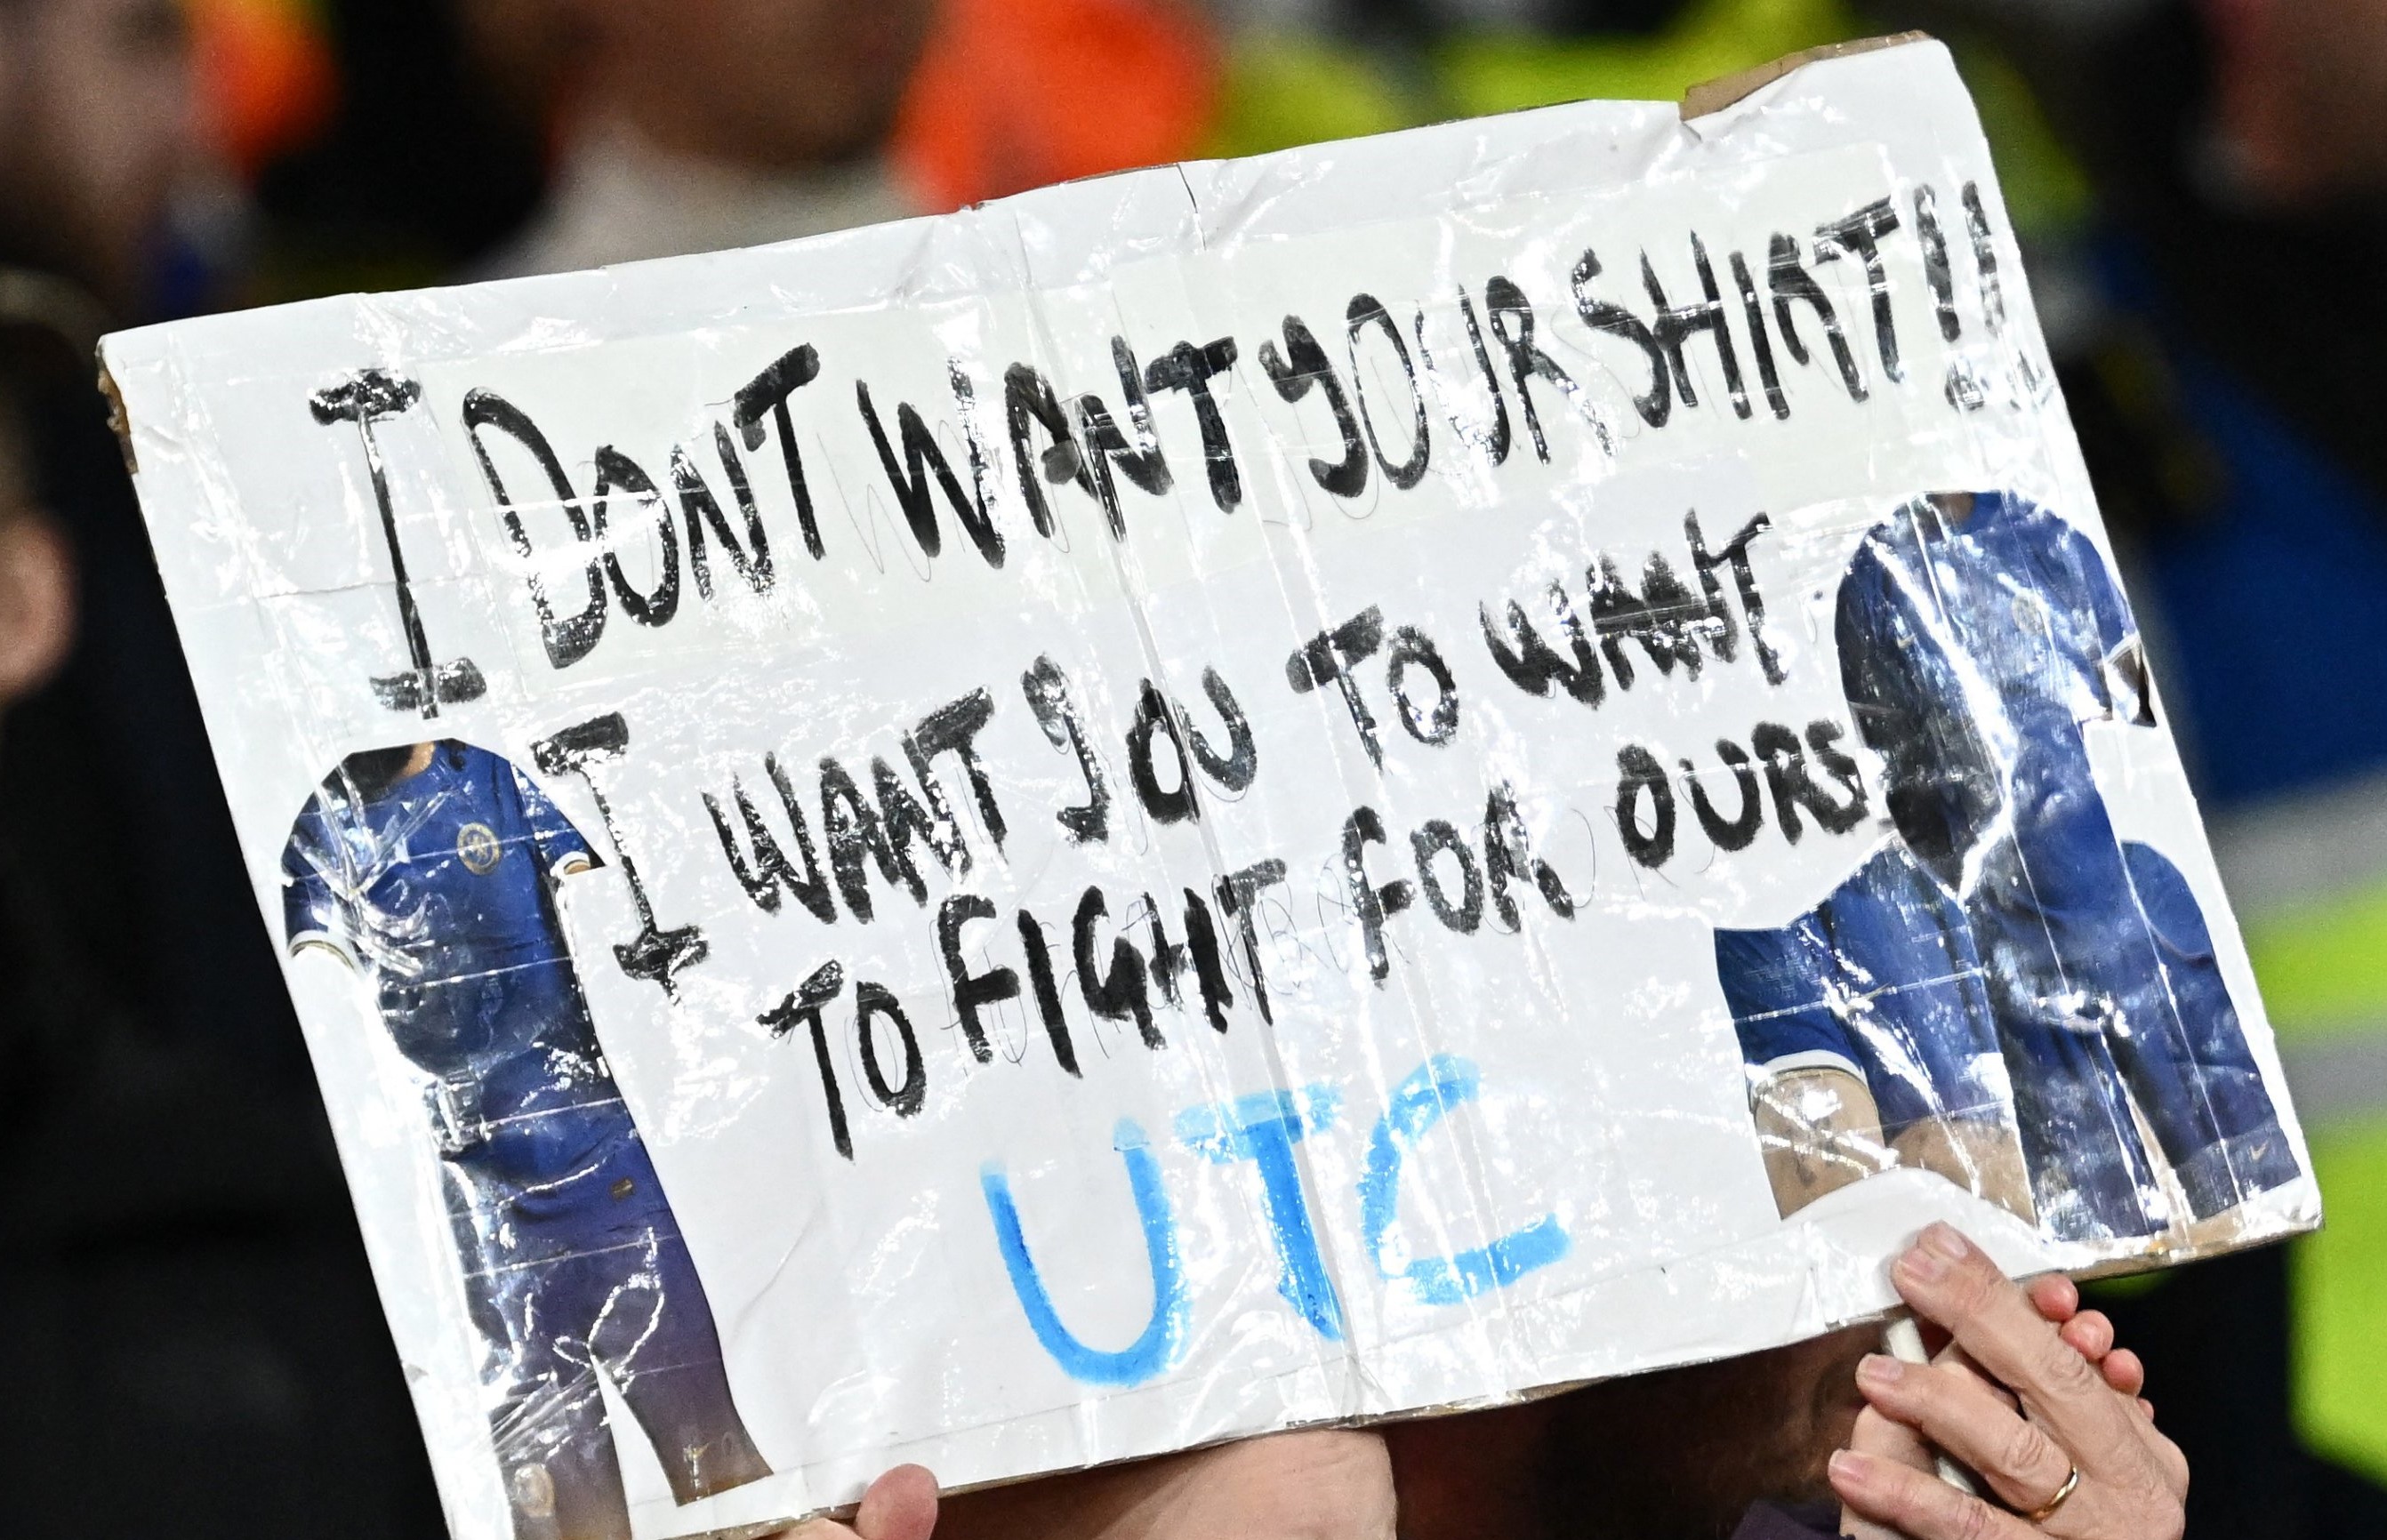 Every Chelsea fan will agree with message on young supporter’s sign during Arsenal hammering